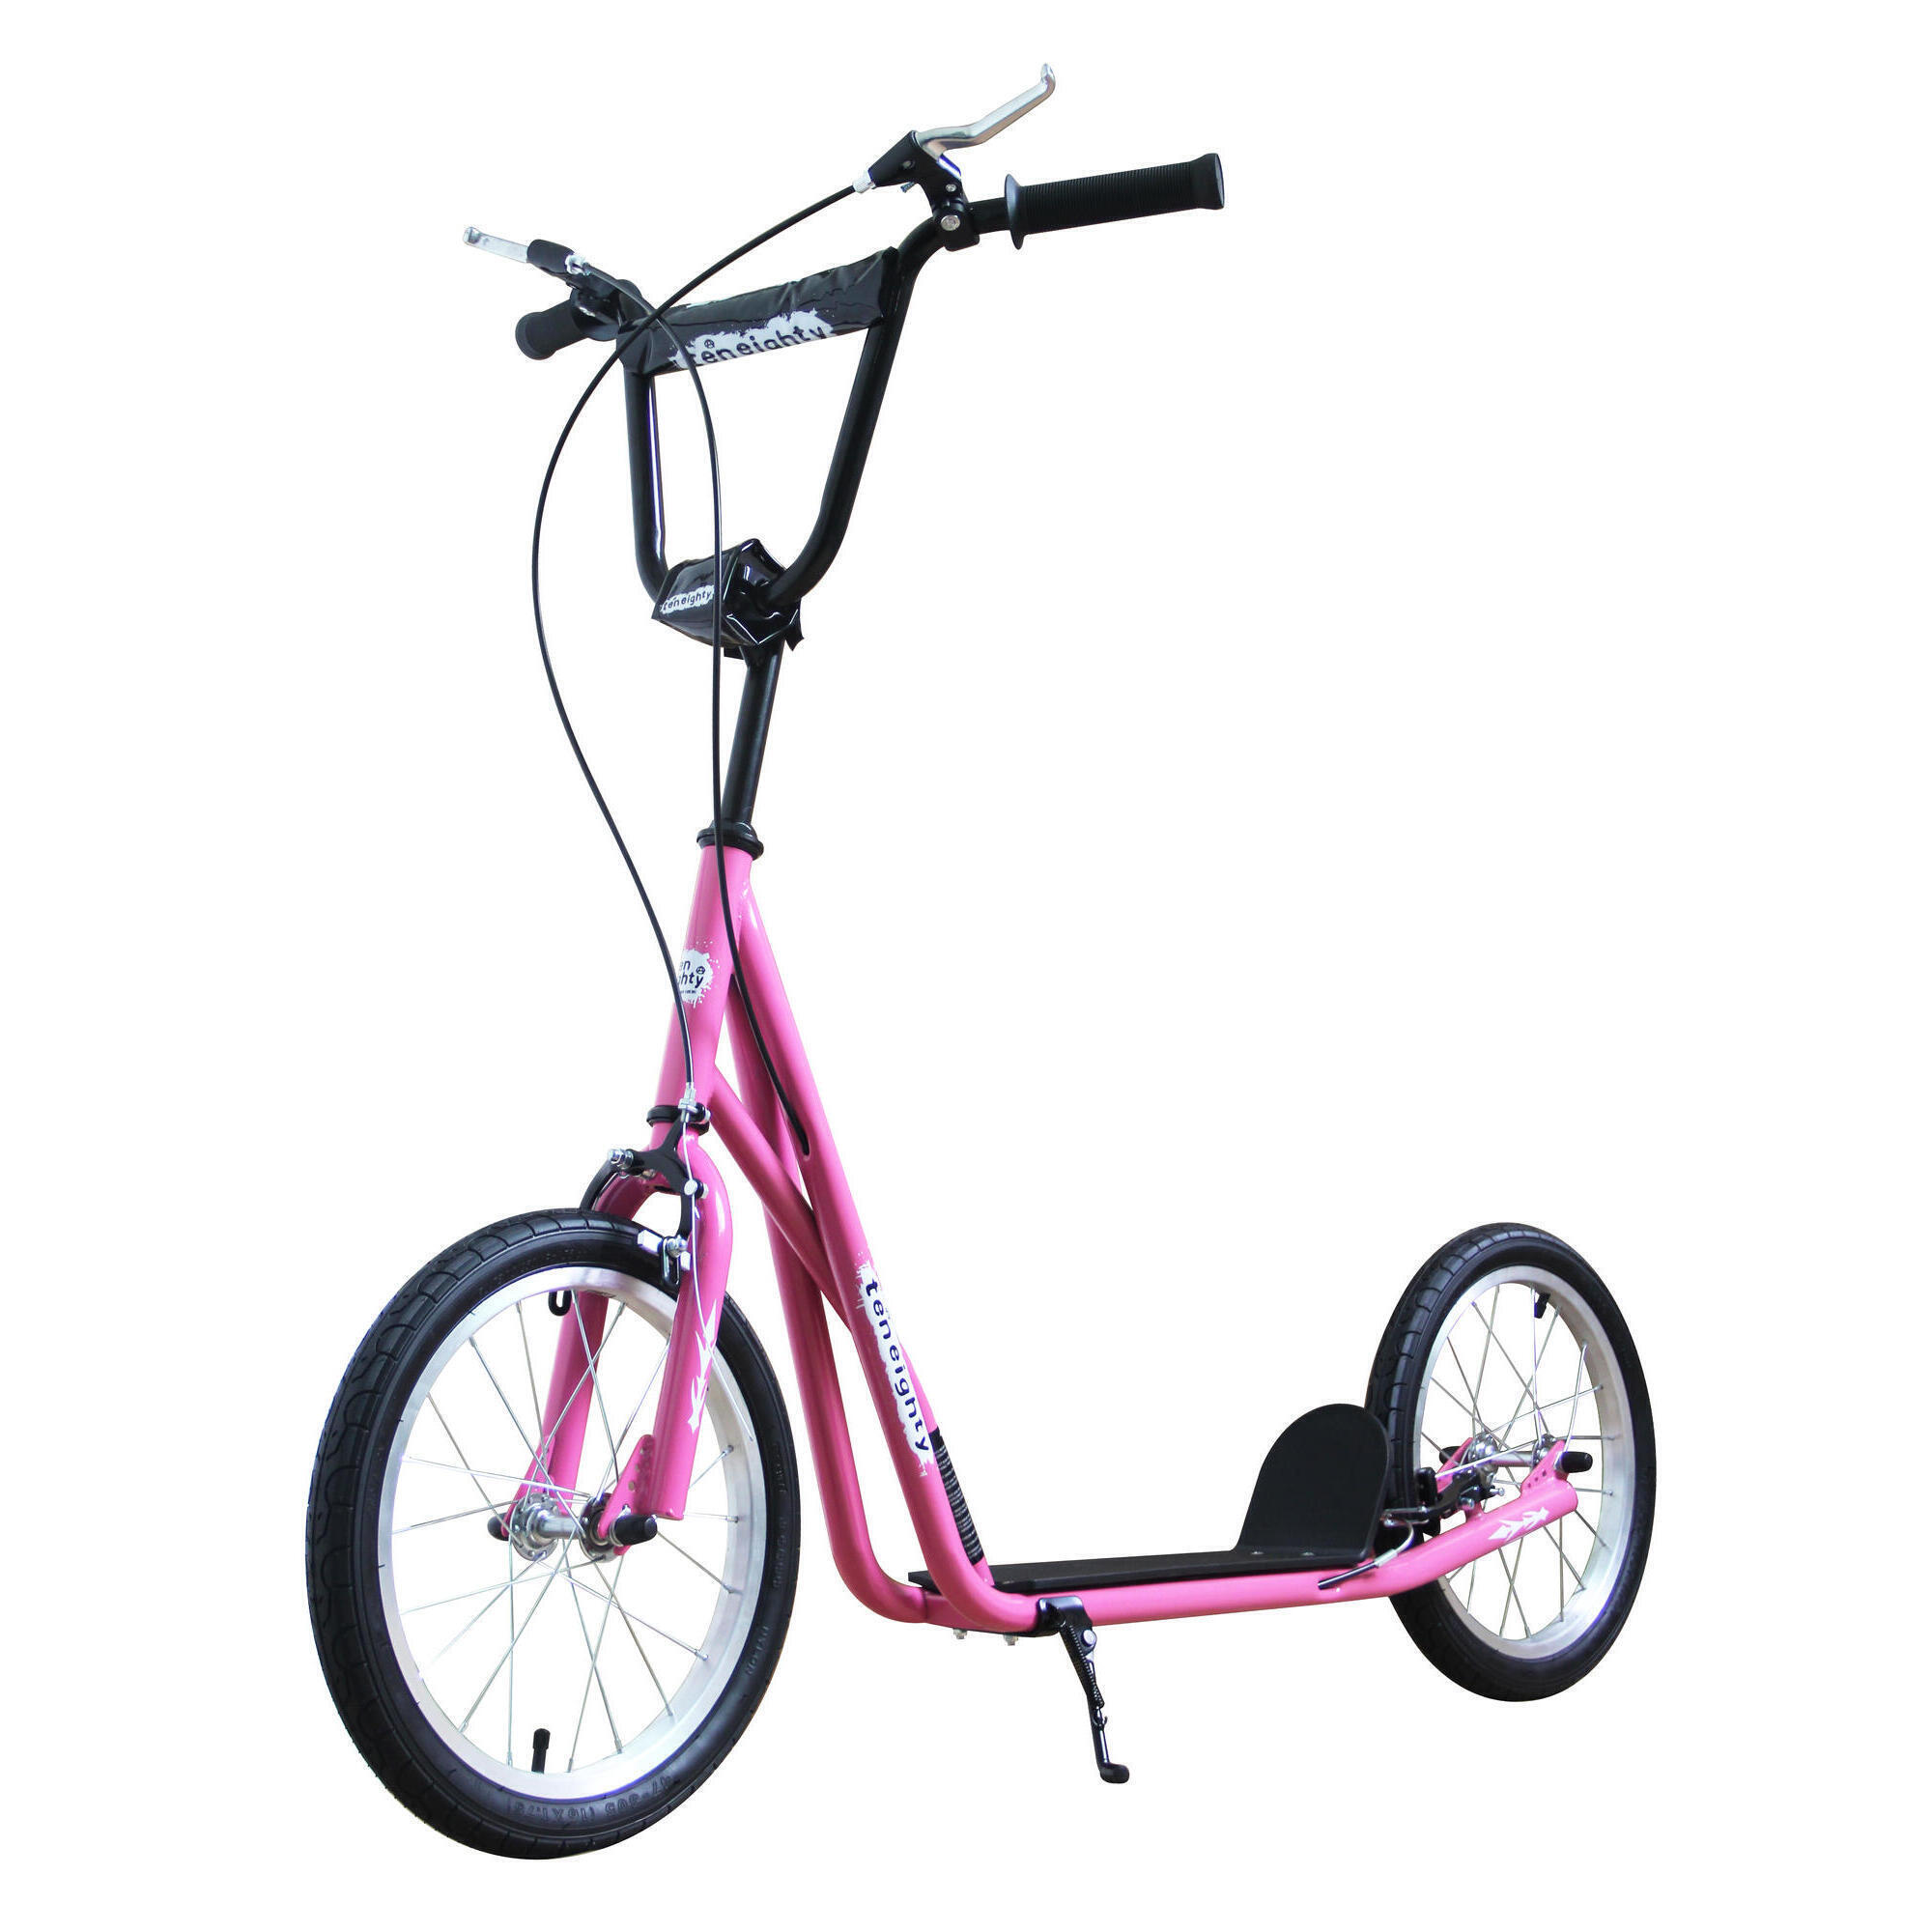 XN 1080 BMX Style Commuter Scooter, 16in Wheel - Candy Pink